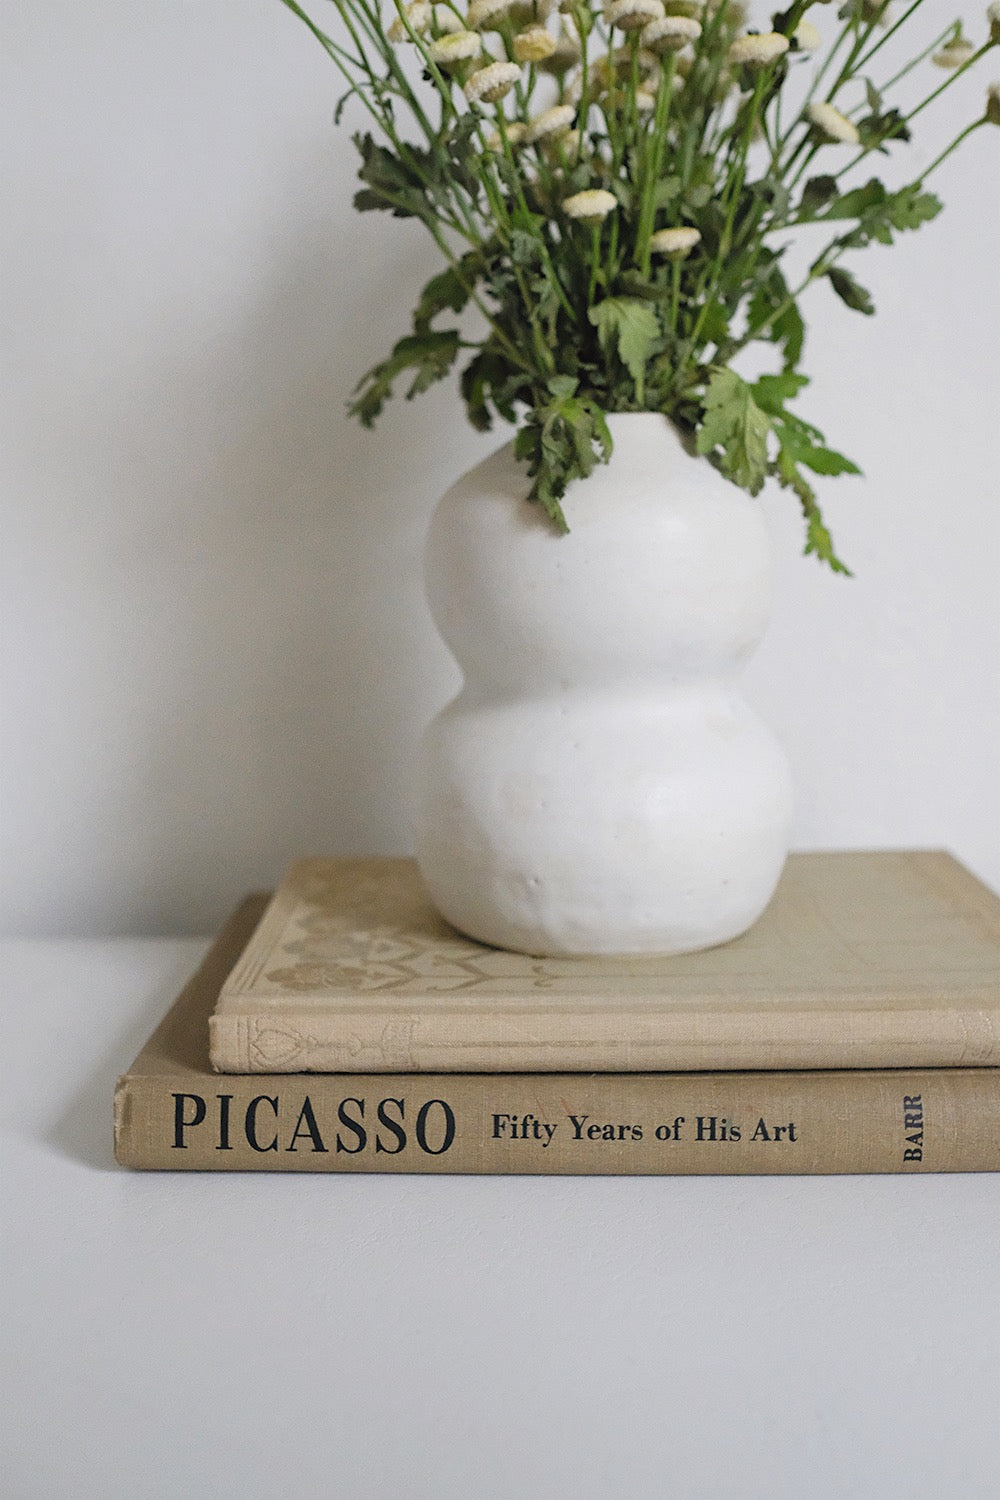 "picasso: fifty years of his art"